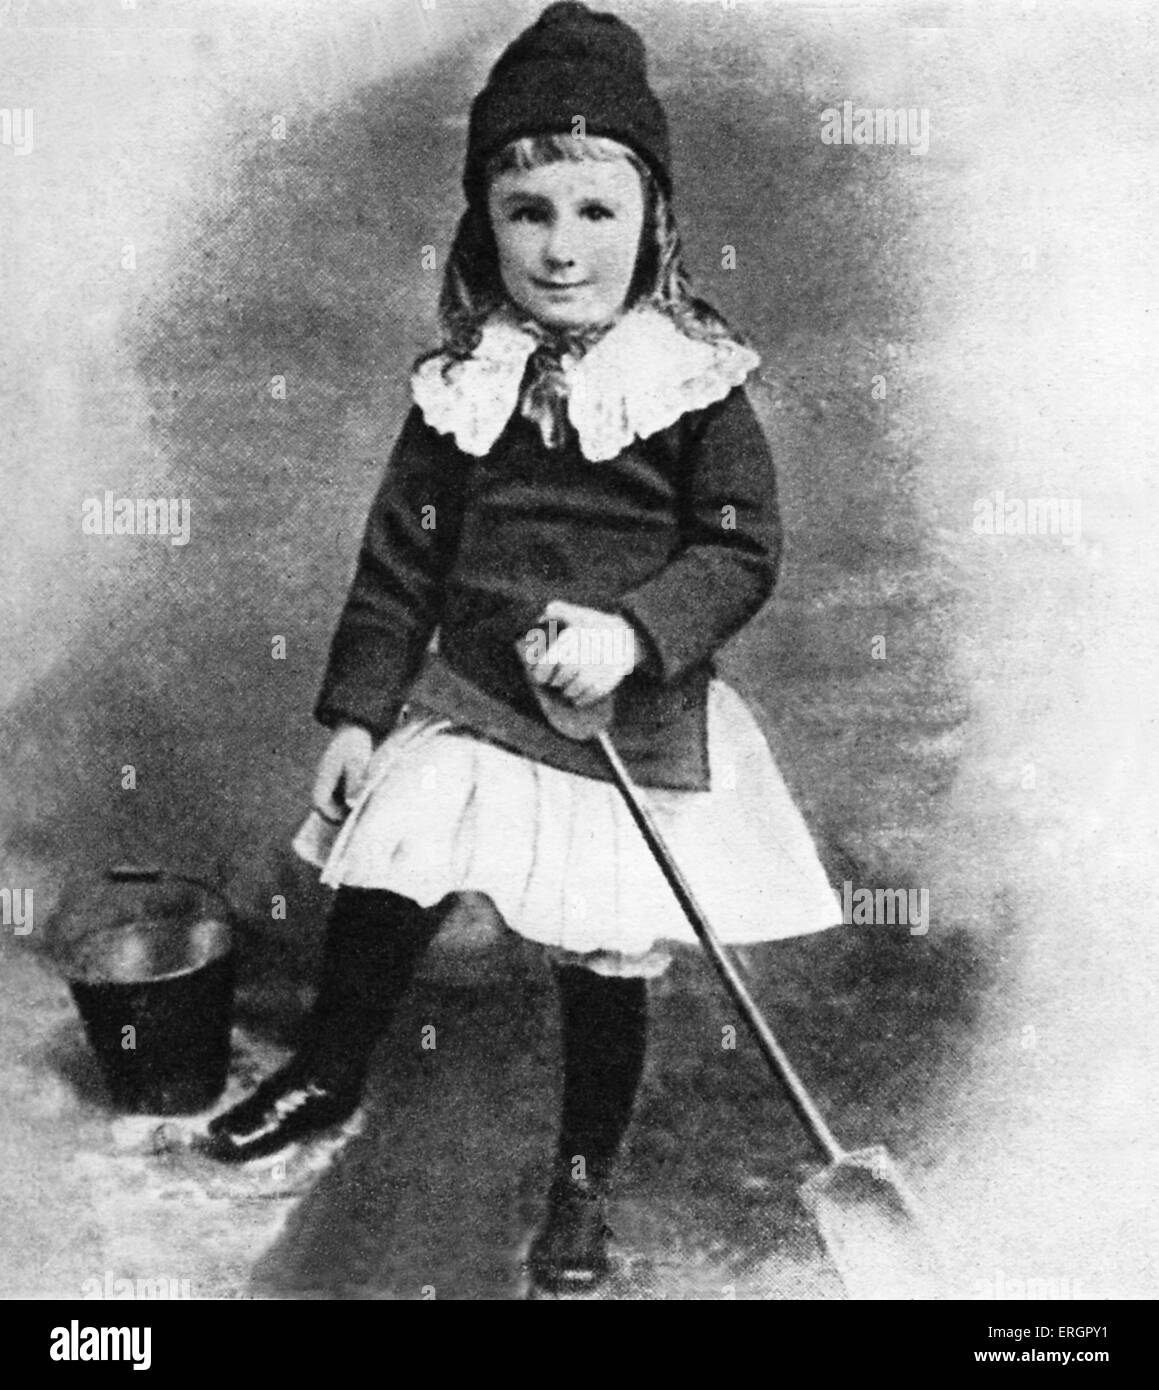 Franklin D. Roosevelt poses with a bucket and spade at the age of three years. FDR: 32nd President of the United States Stock Photo